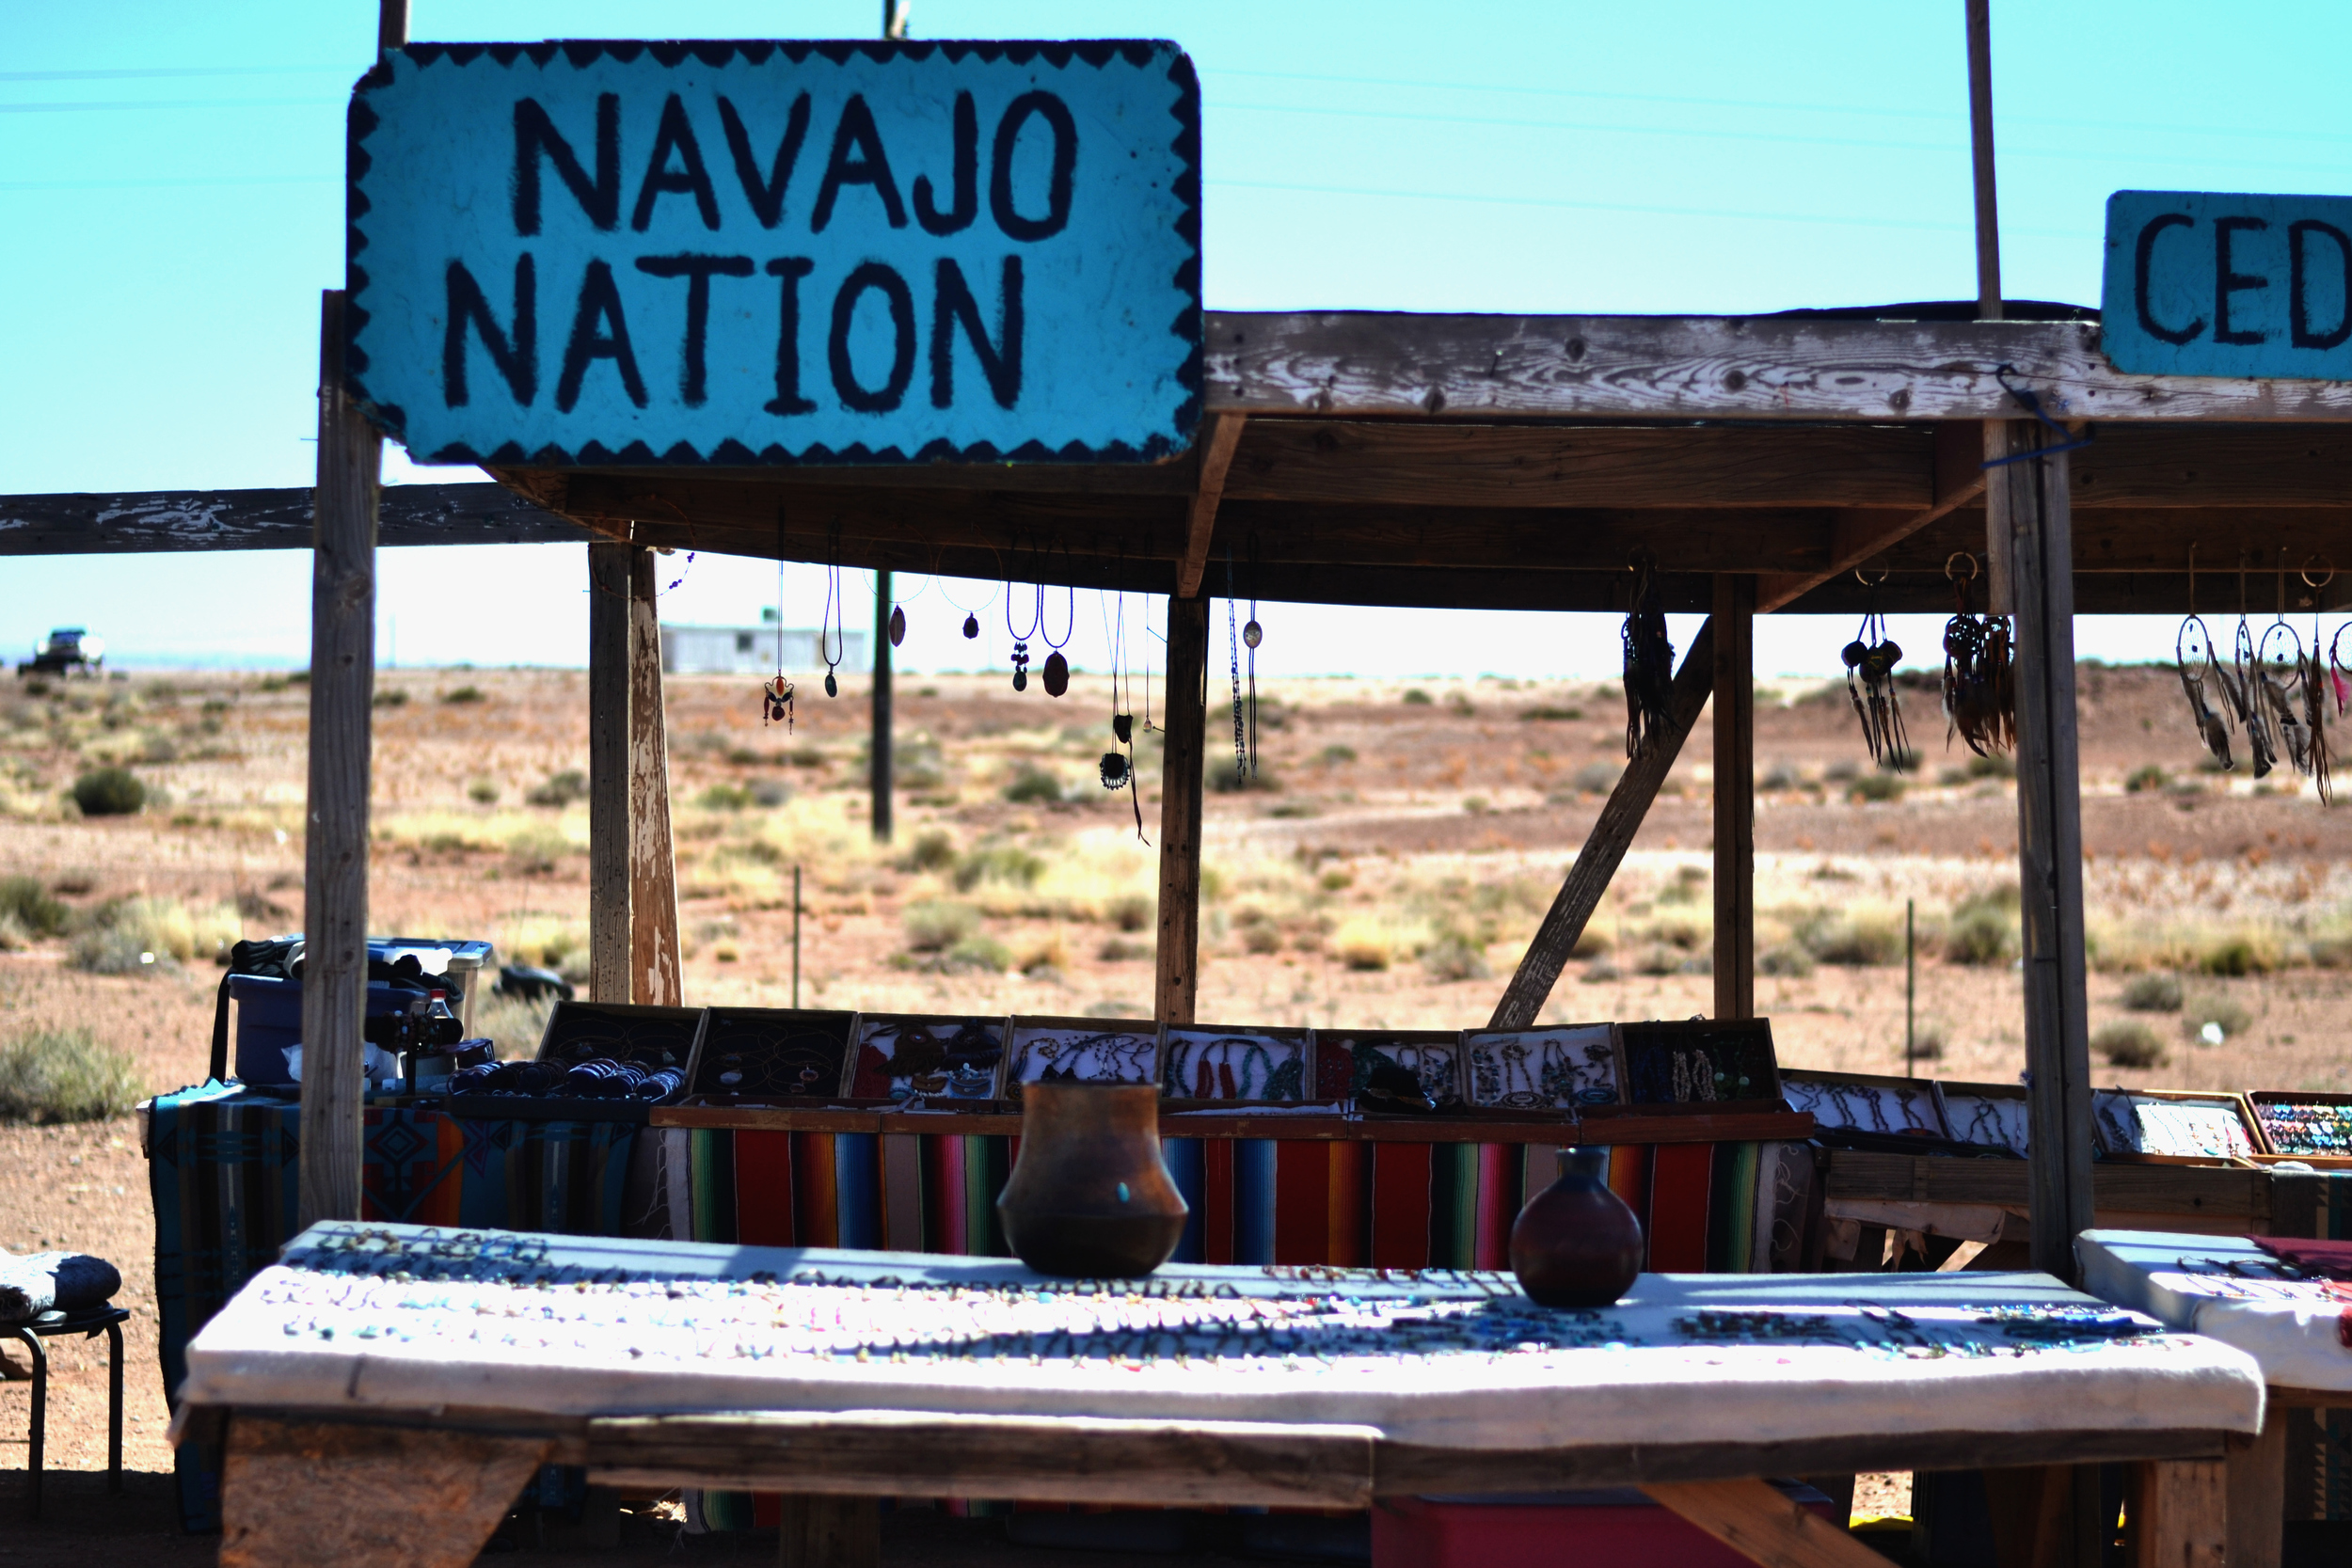 We made a Uturn to stop at this store front in Navajo Nation.